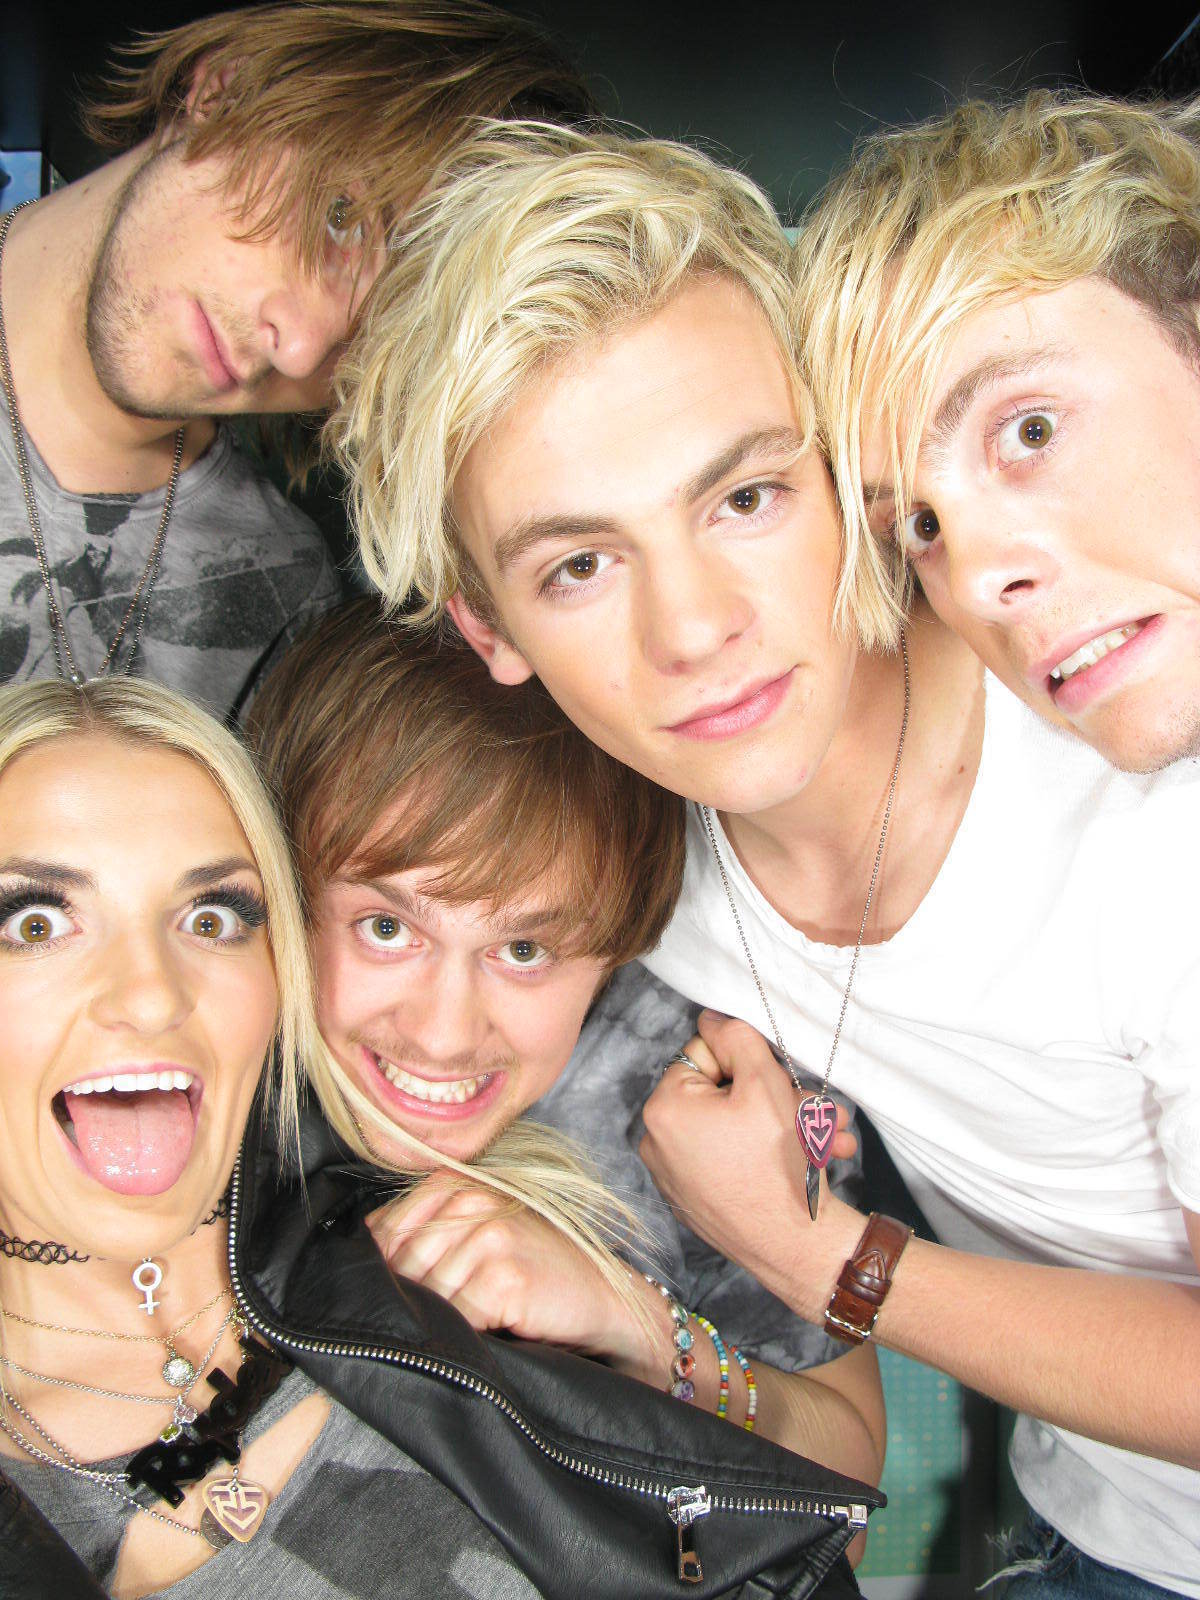 R5 took pics in the RDMA photo booth